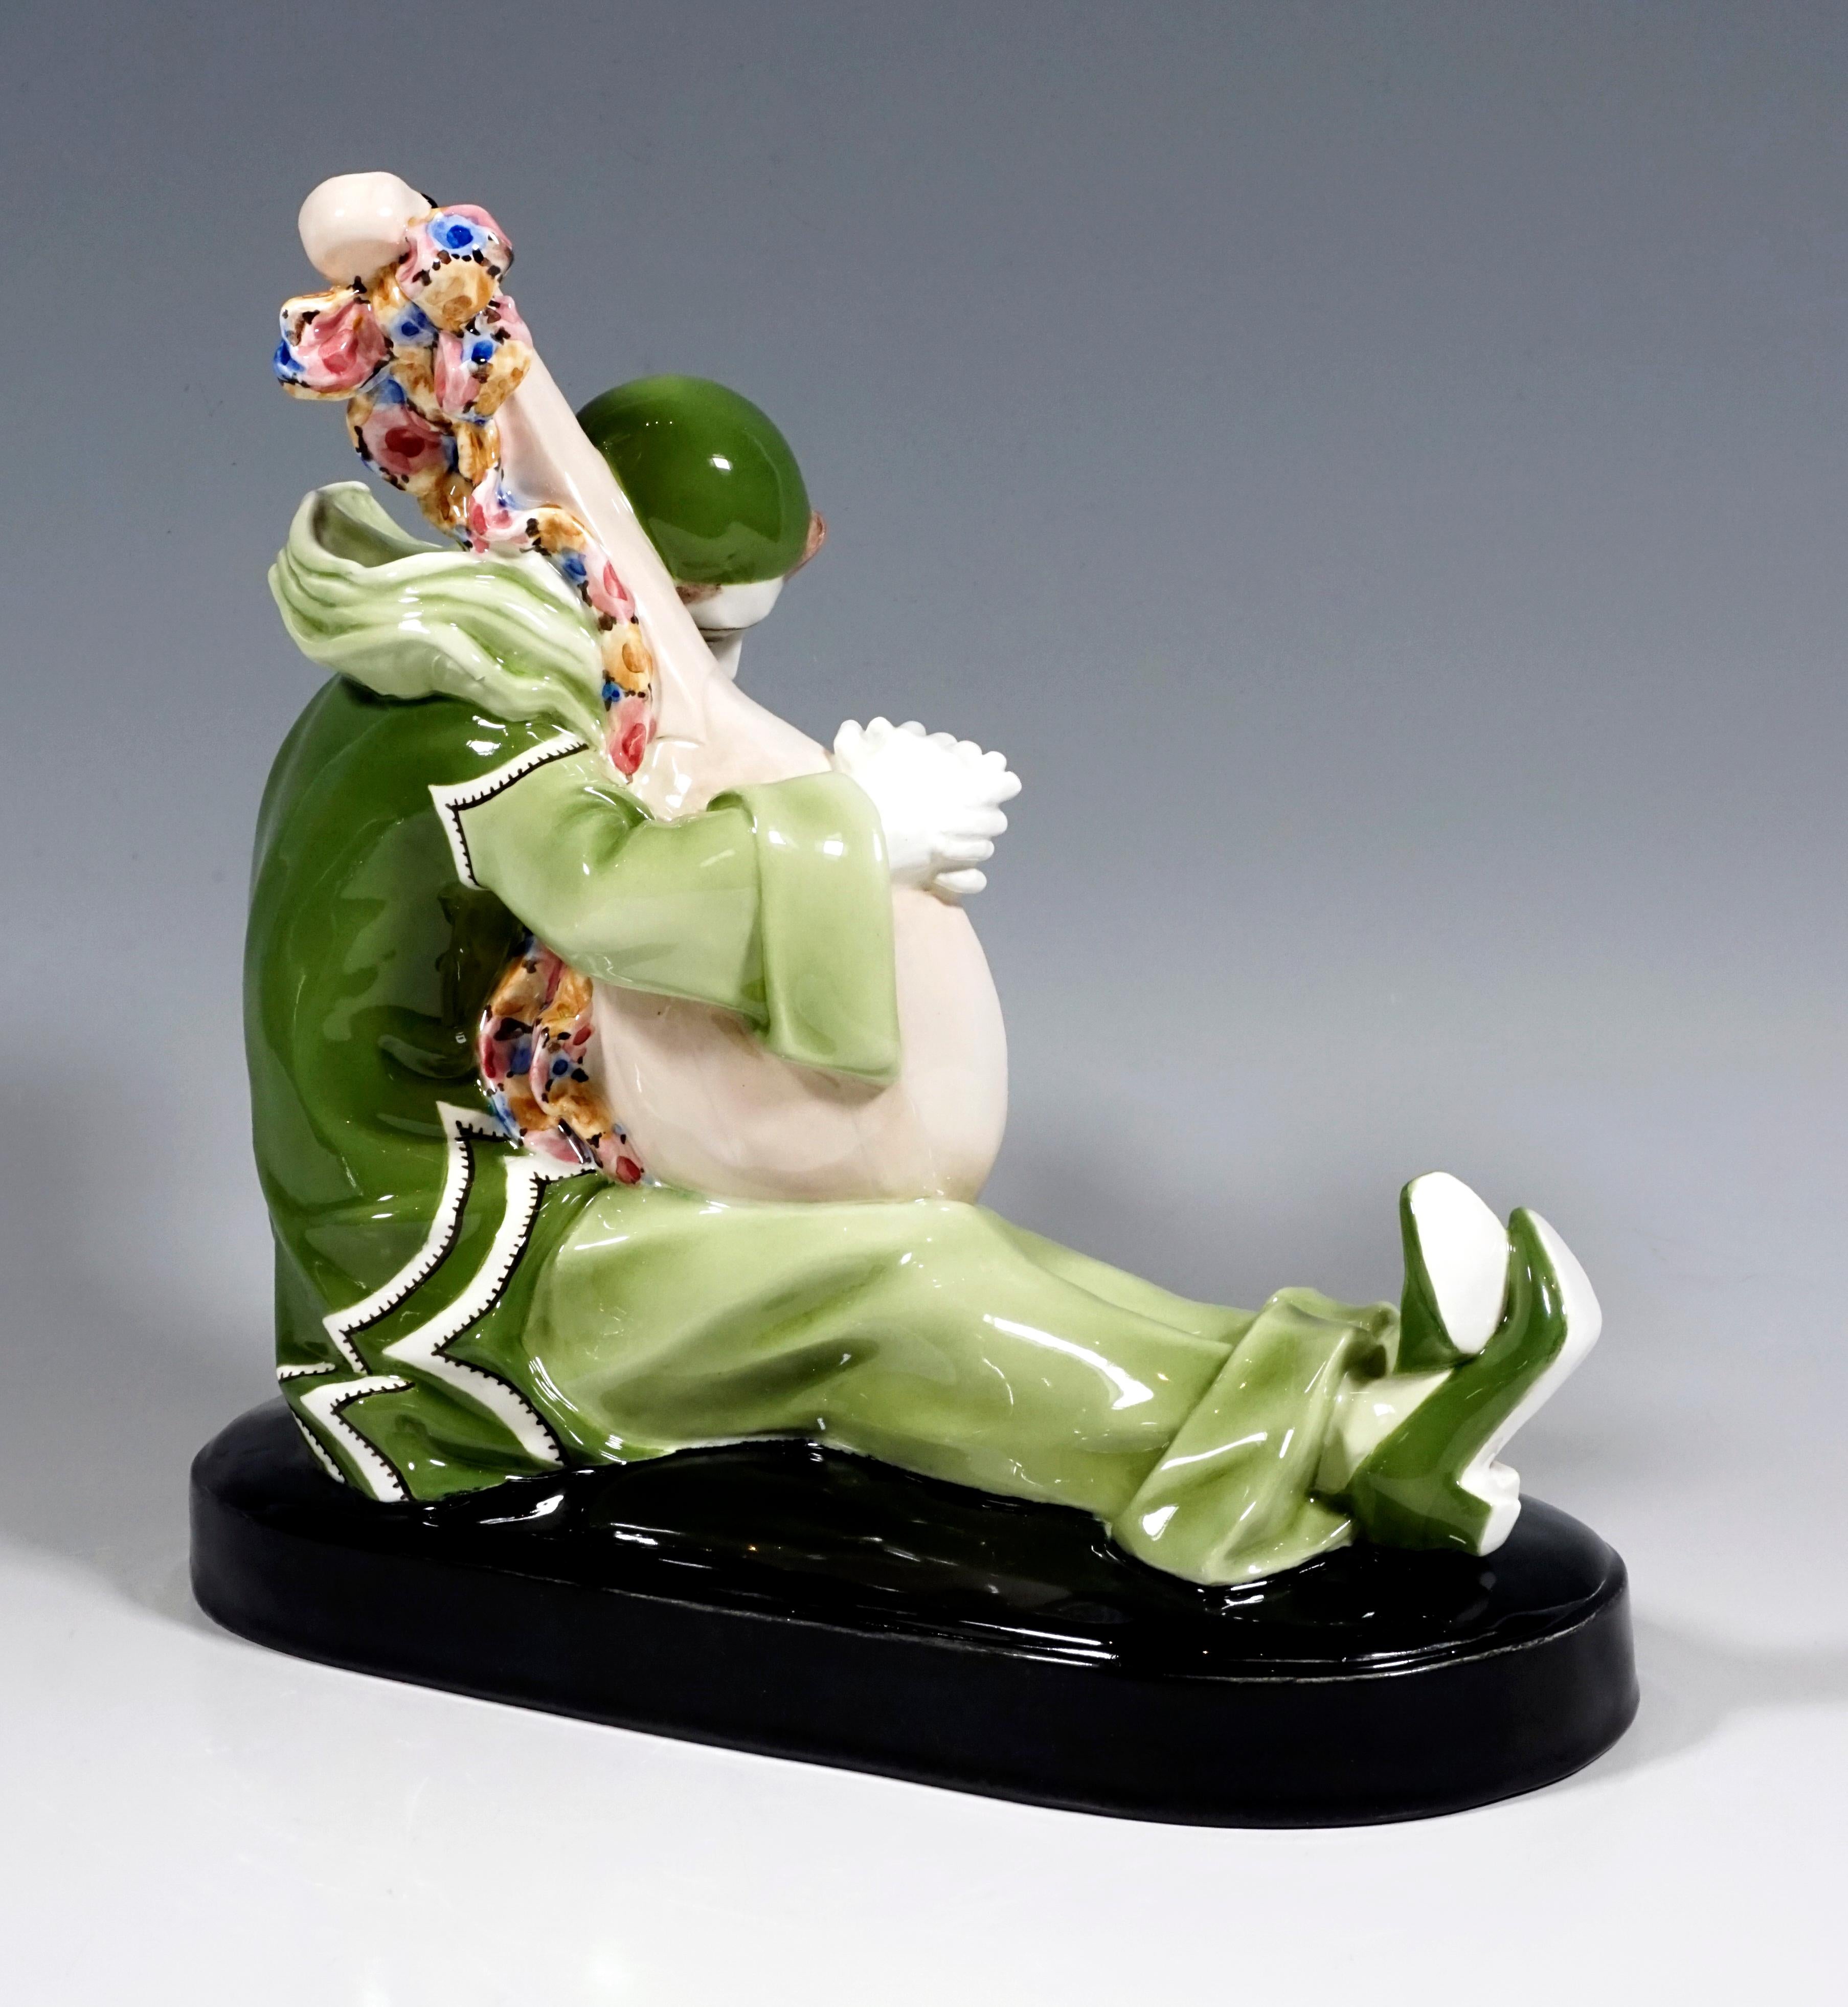 Depicted is a young musician, dressed up as Pierrot, who is sitting on the elongated base with his legs outstretched and hugging his lute. He wears a green suit with a wide, multi-layered collar, hood, long trousers and high heel shoes.
On a black